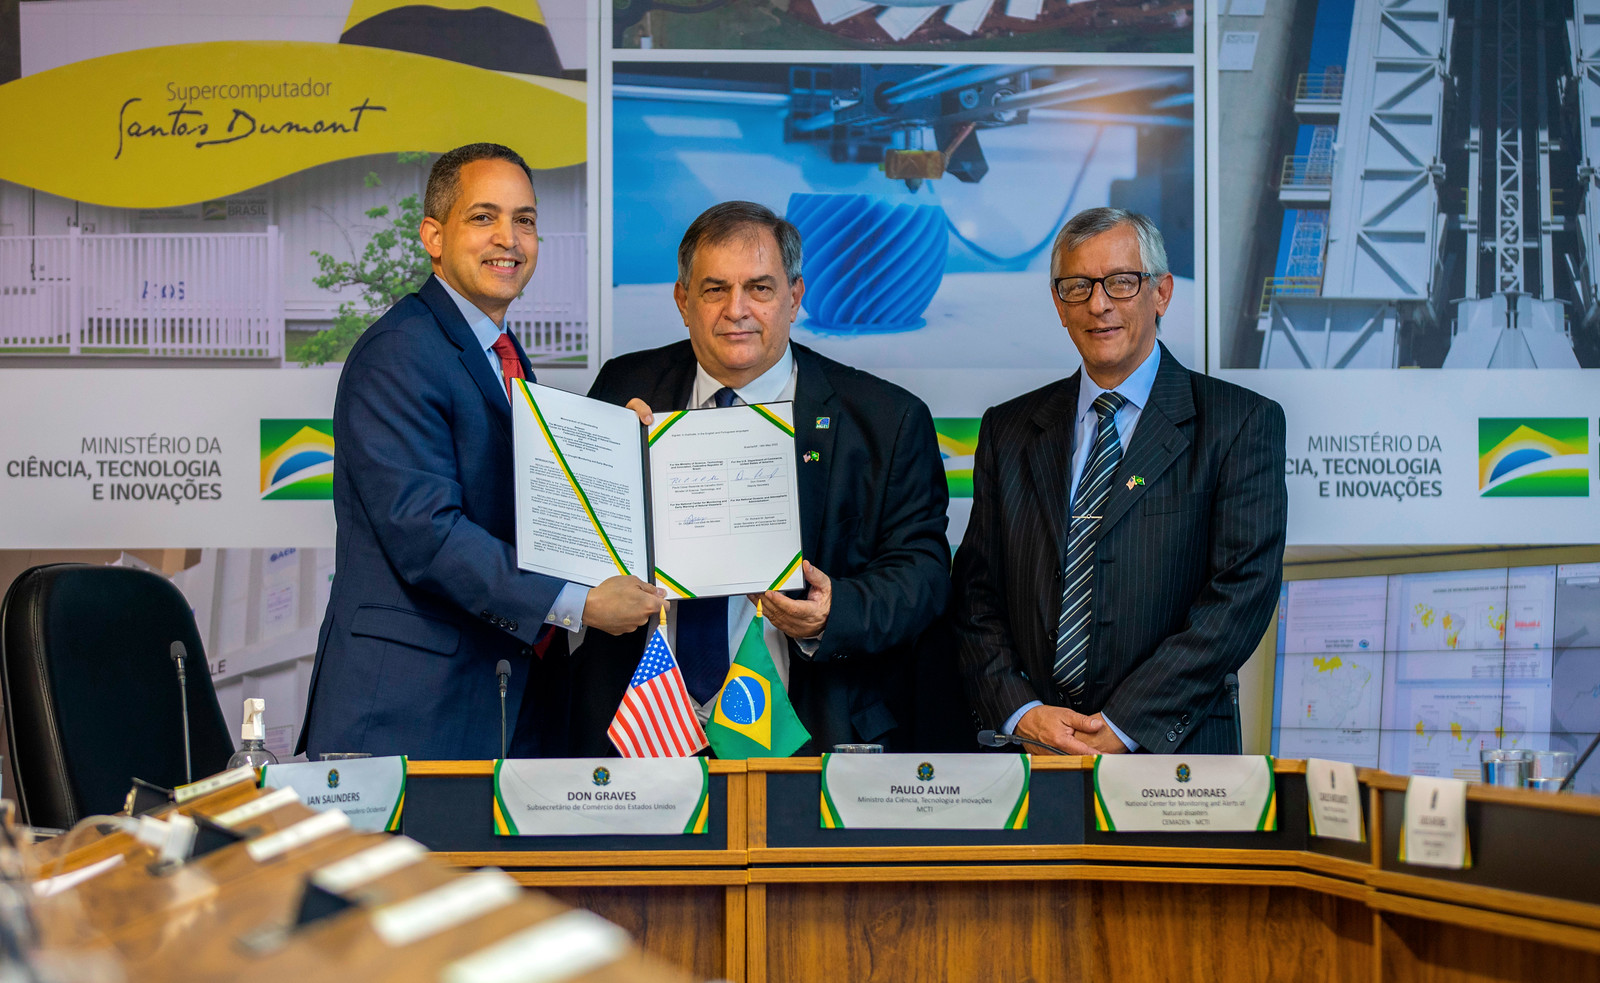 Representatives holding signed NOAA-CEMADEN Agreement